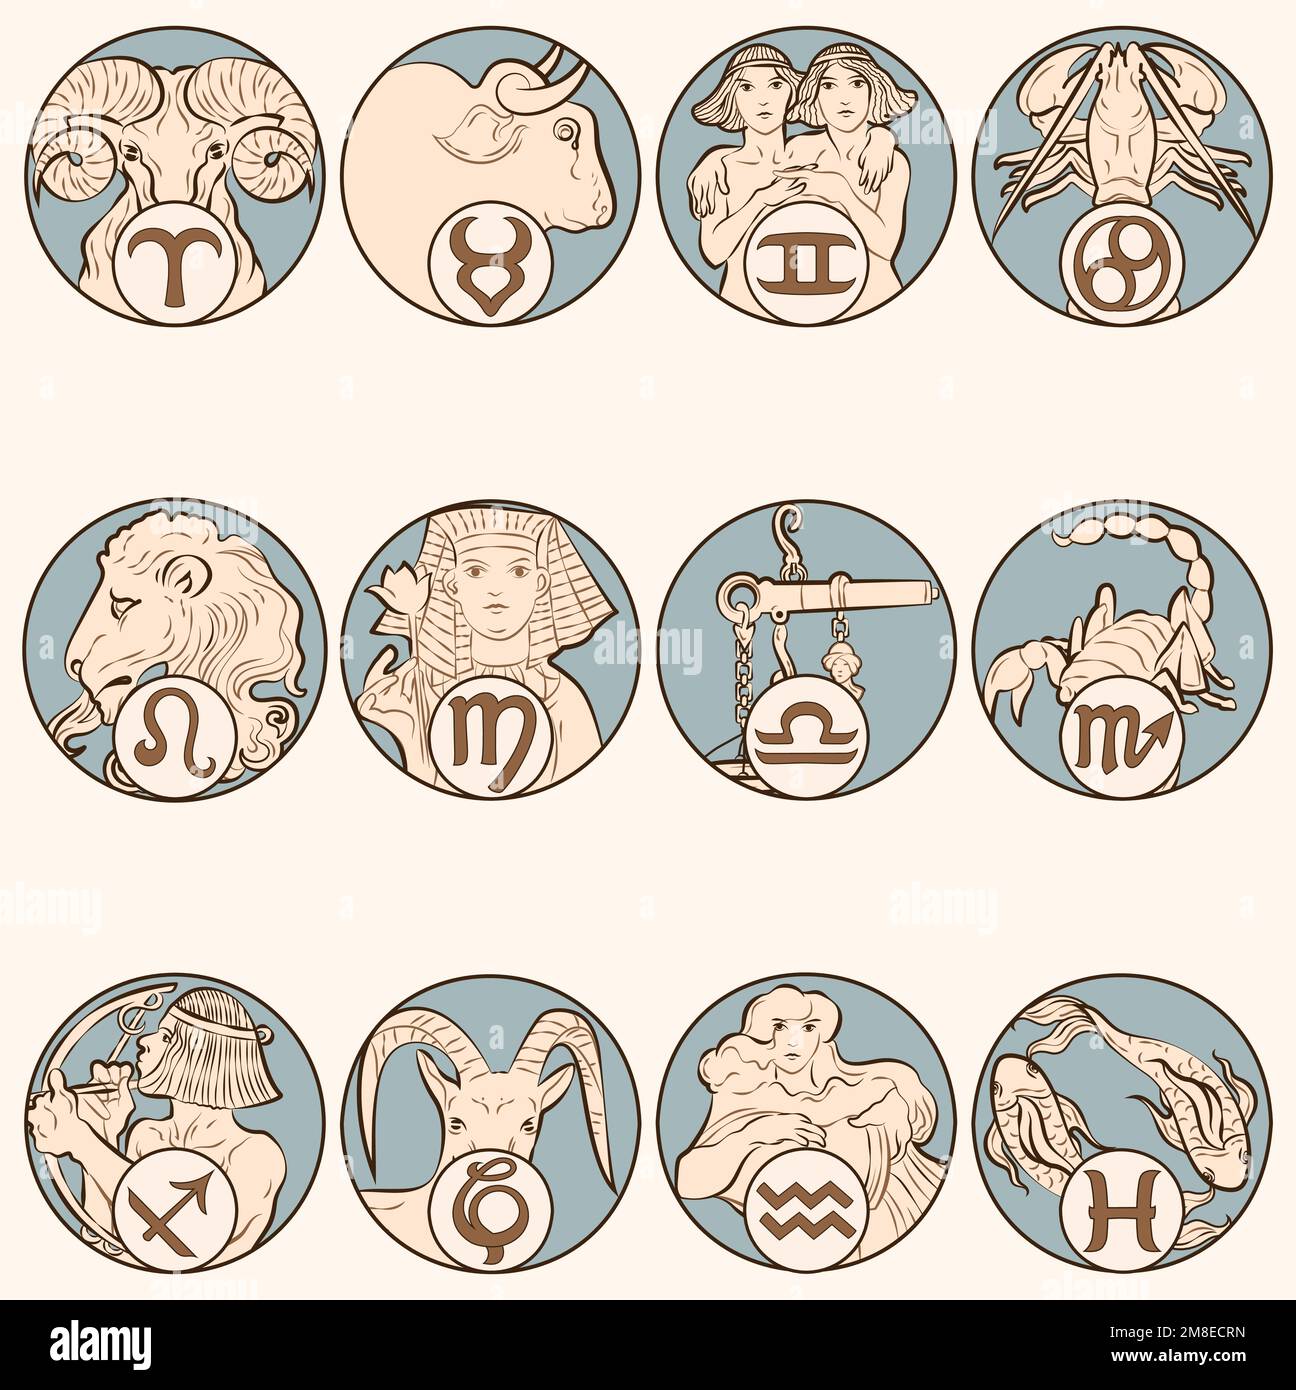 Art nouveau 12 zodiac signs vector, remixed from the artworks of Alphonse Maria Mucha Stock Vector